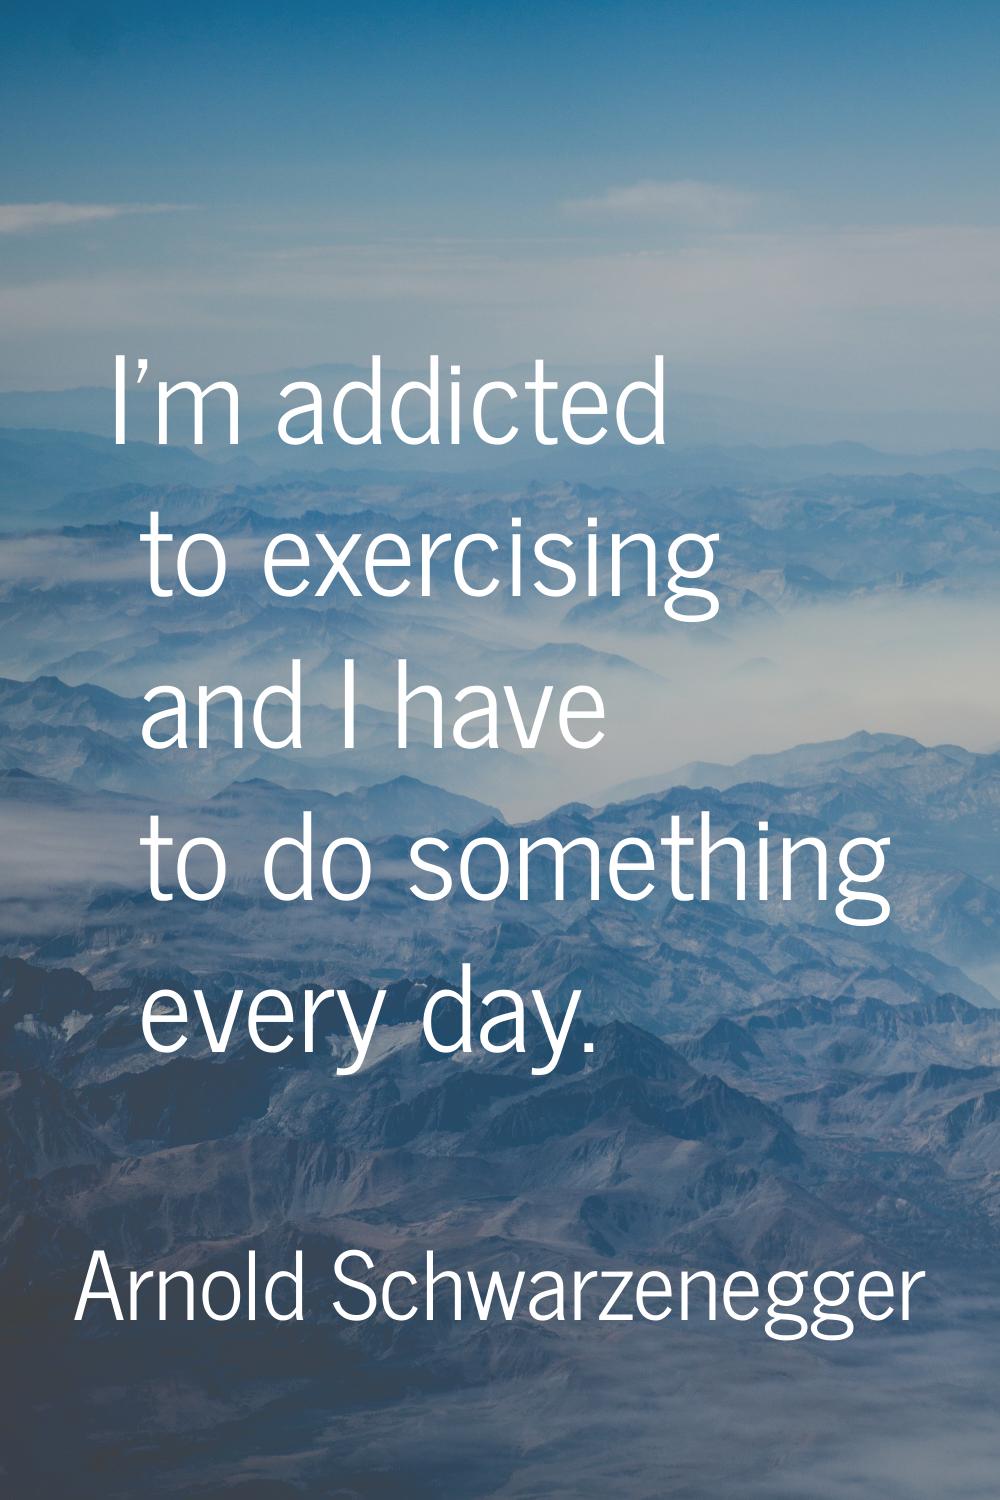 I'm addicted to exercising and I have to do something every day.